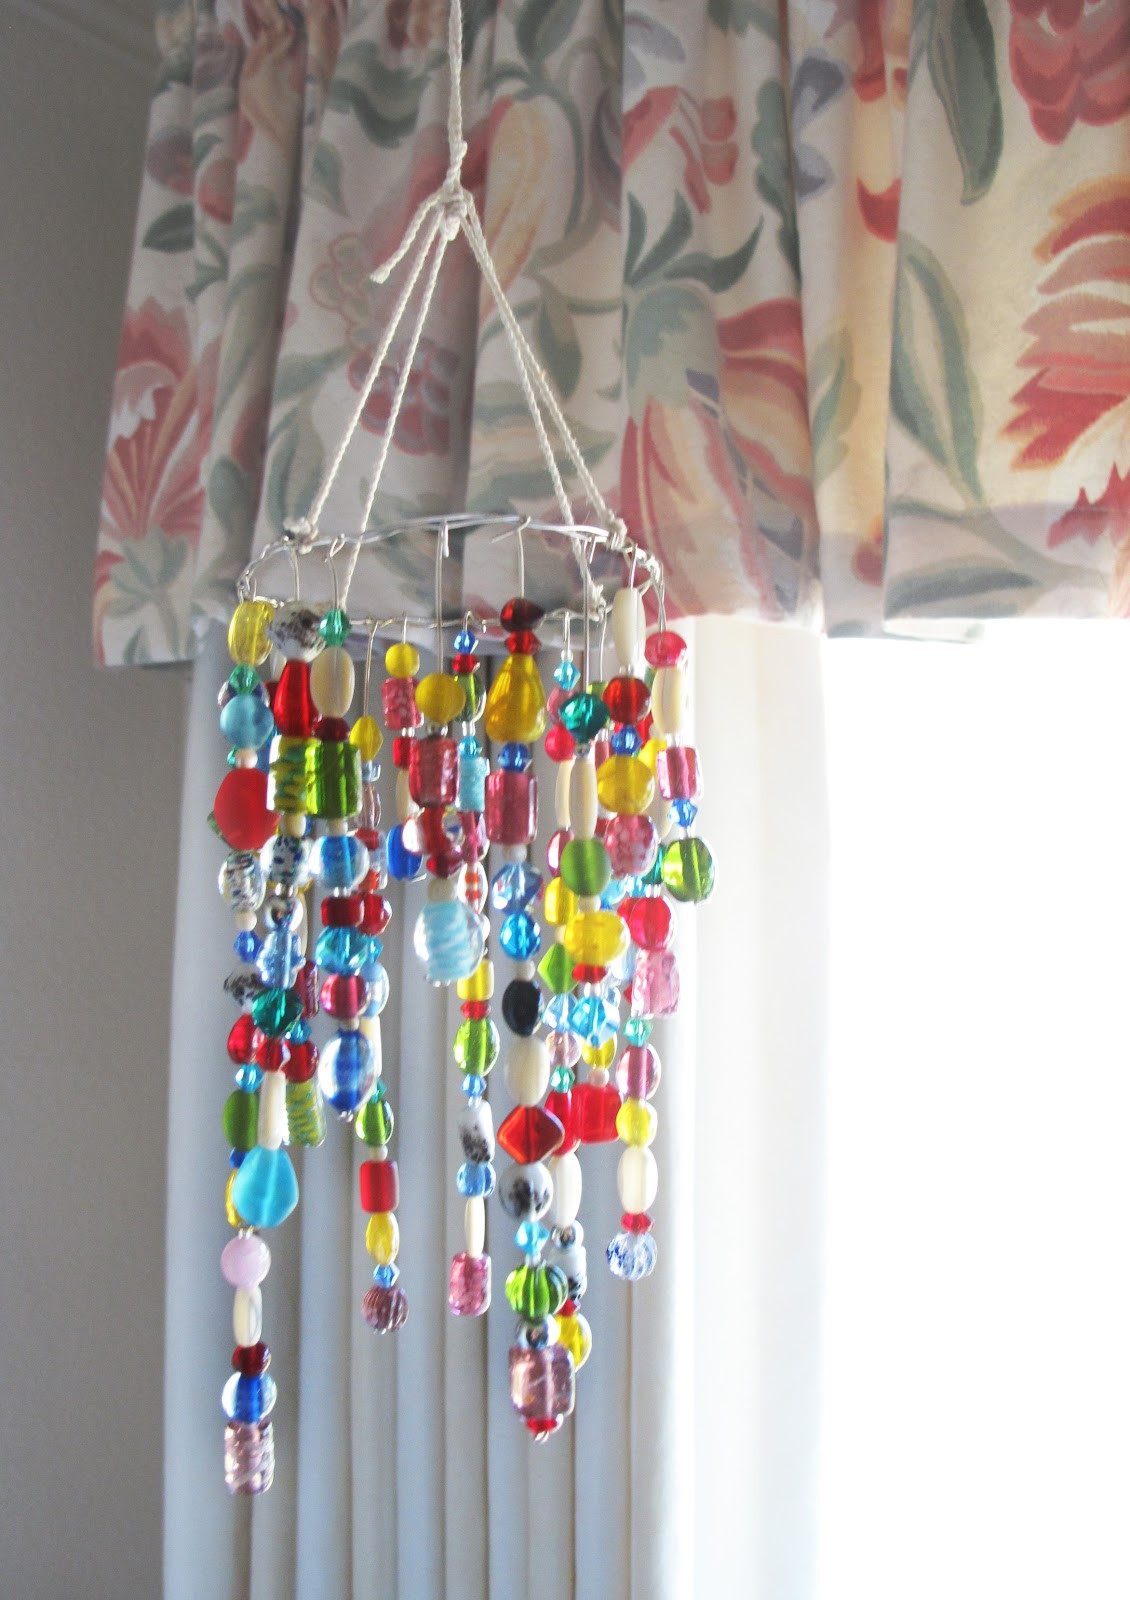 DIY Hanging Ceiling Decorations
 paint the tears diy room decor